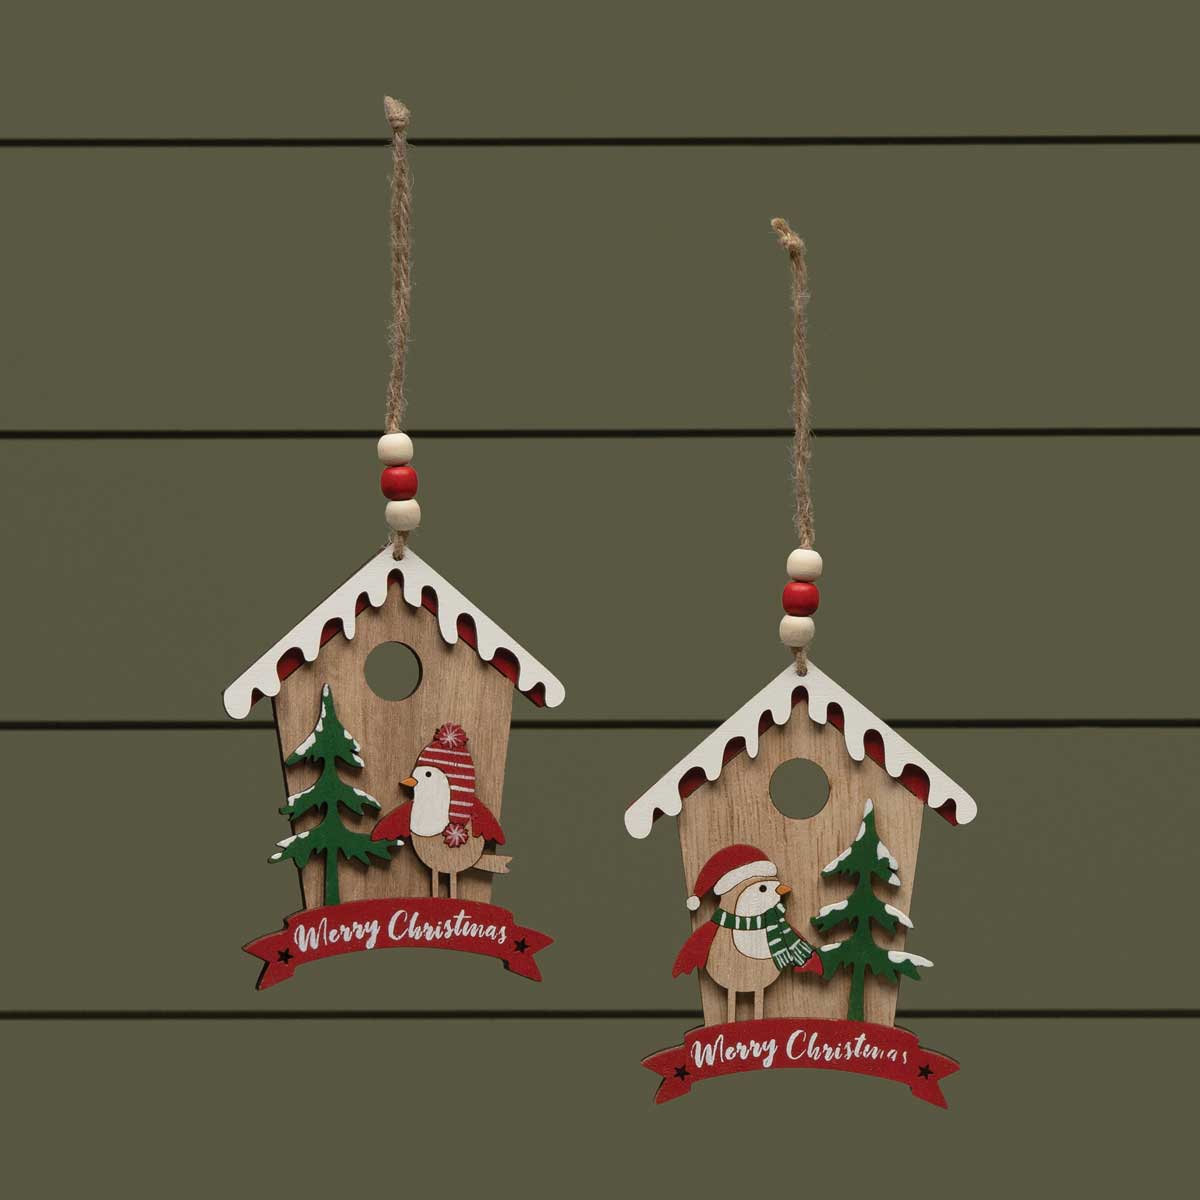 ORNAMENT BIRDHOUSE 2 ASSORTED 3.75IN X 5IN WOOD